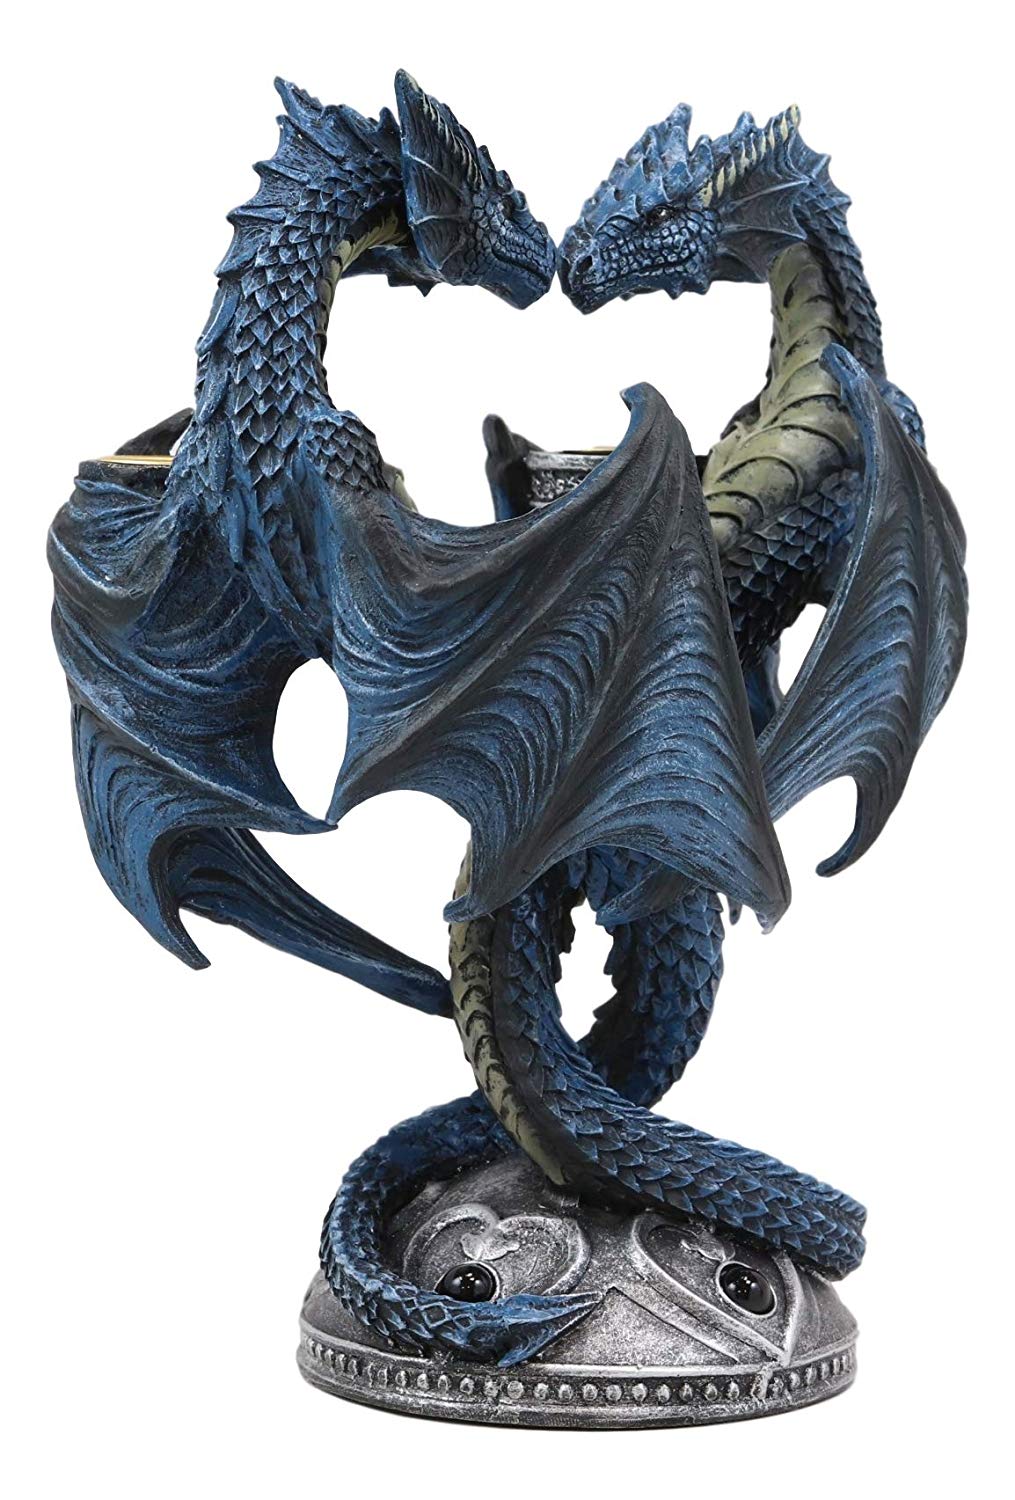  SUMMIT COLLECTION Fantasy Double Dragons Orb Guardian Stone  Dragon Protectors Tabletop Wine Holder Pillar Candle Holder : Home & Kitchen